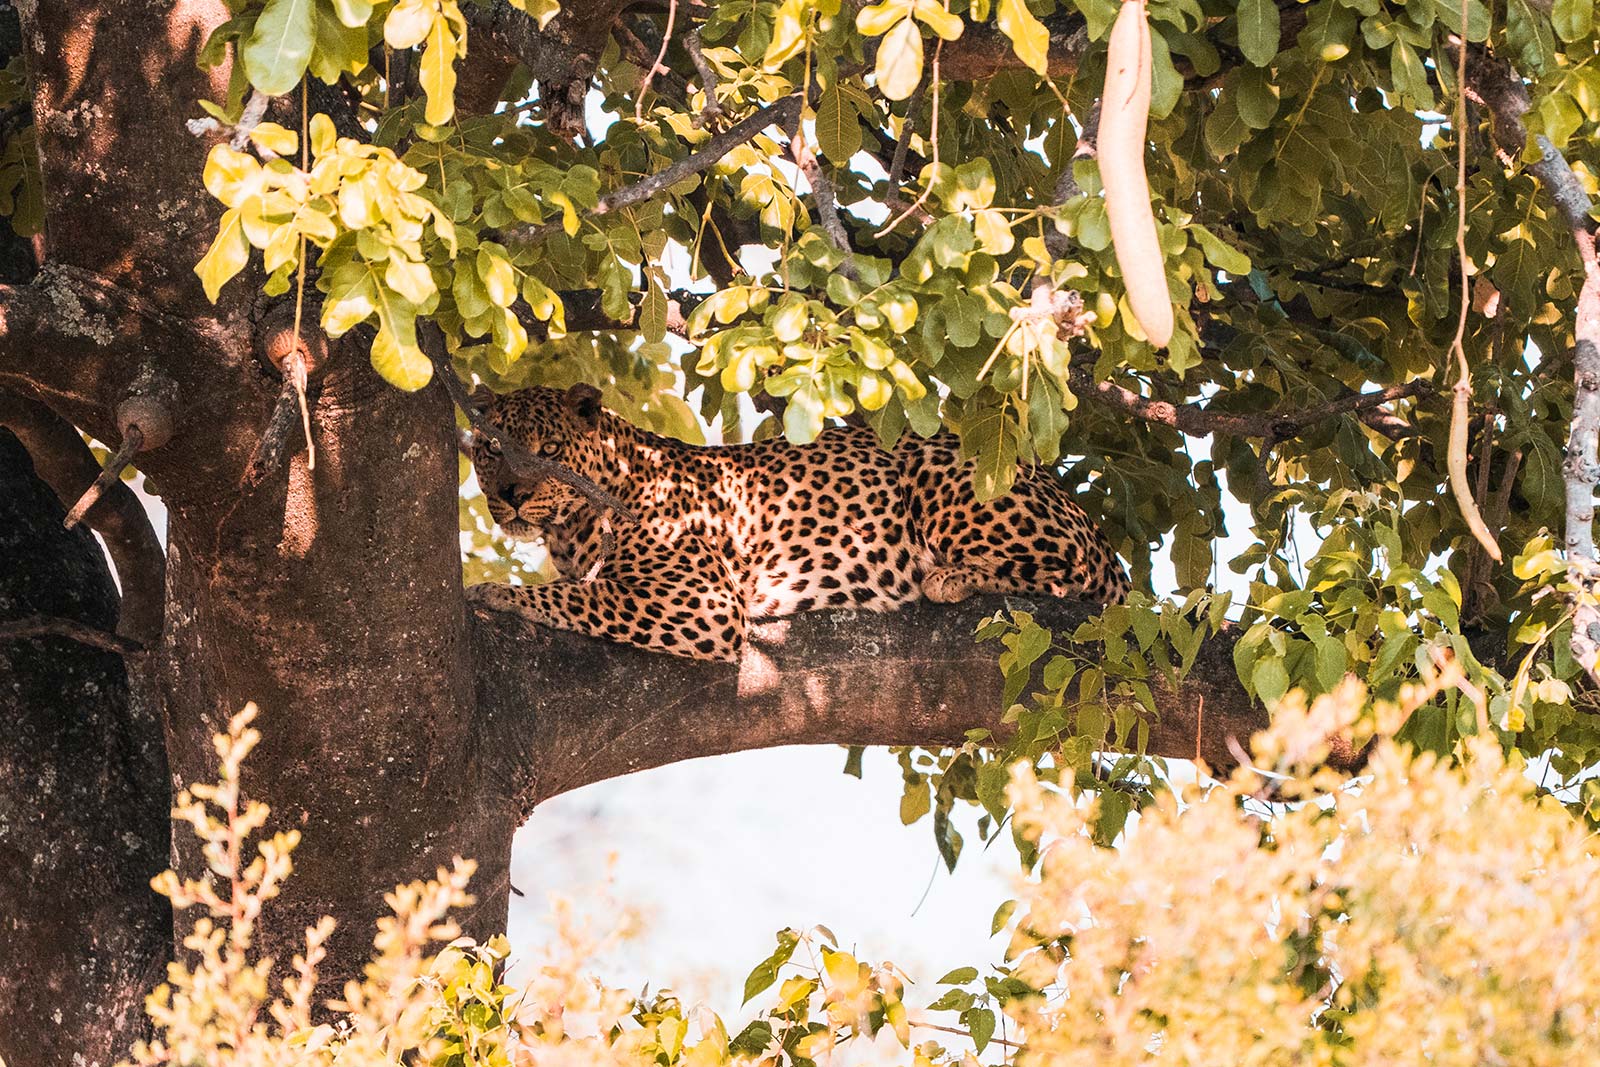 Leopard on a tree in Botswana, Africa. Getting chased by a herd of elephants